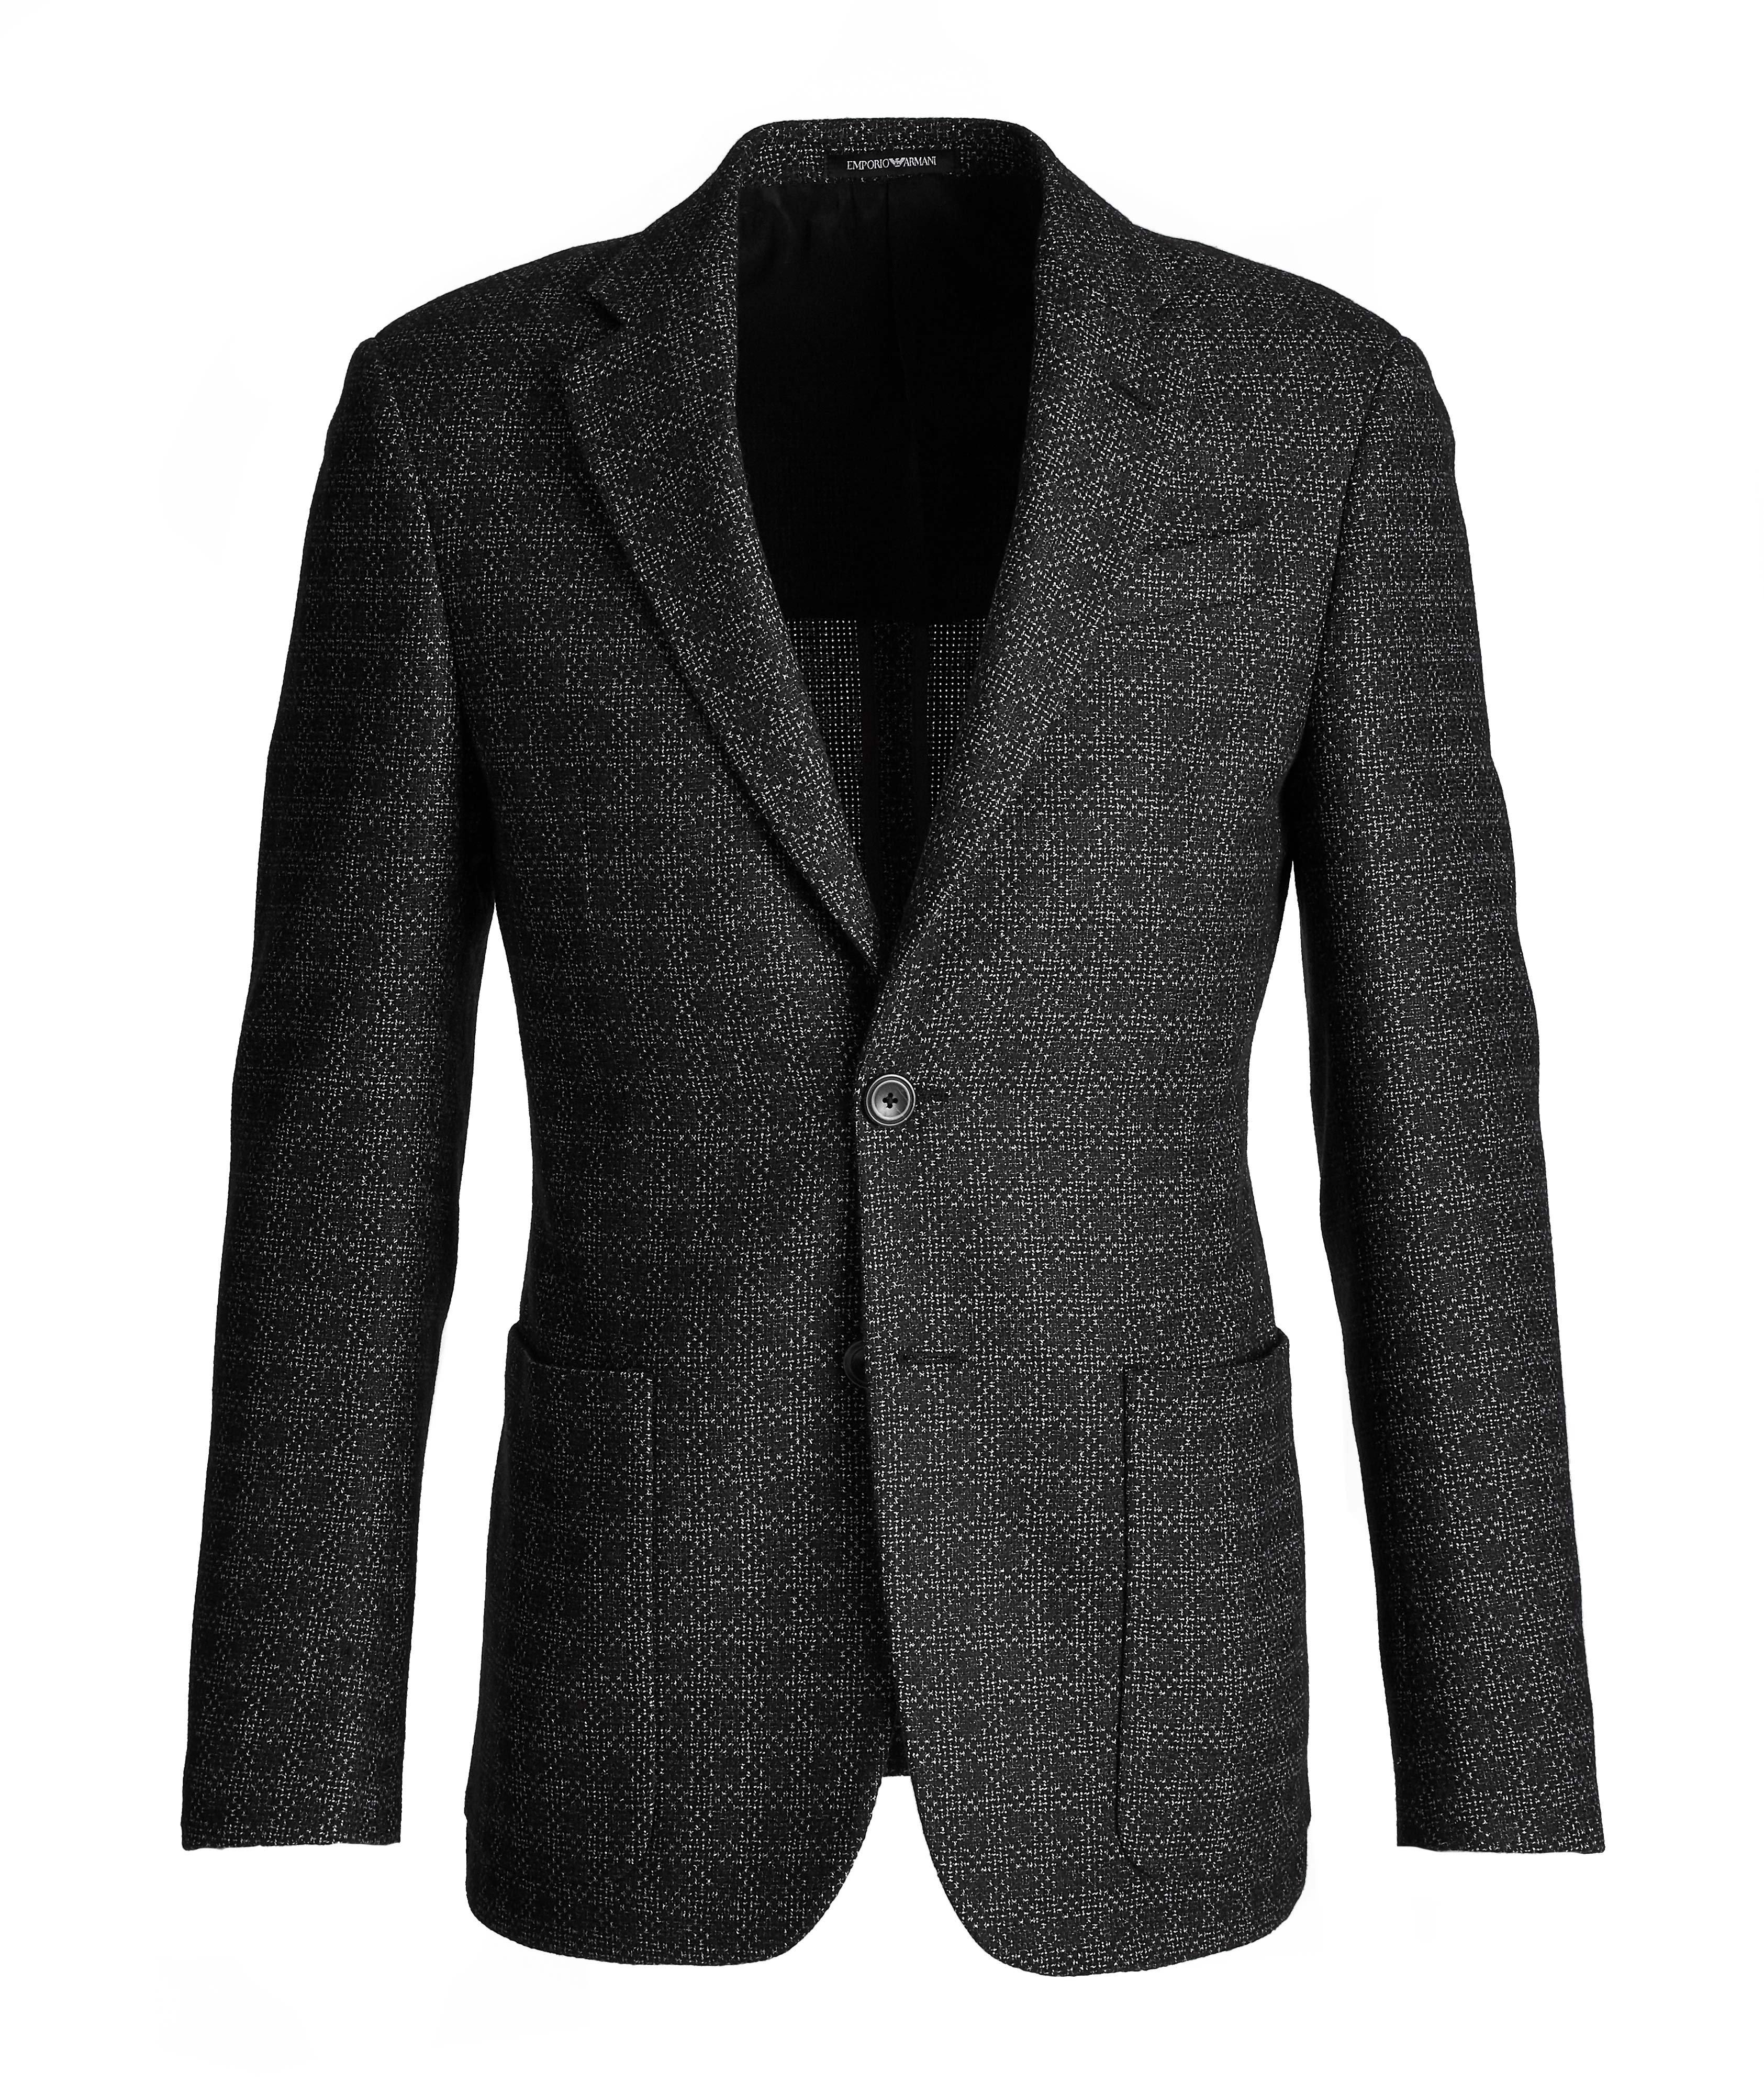 G-Line Deco Wool, Cotton, and Cashmere Sports Jacket image 0